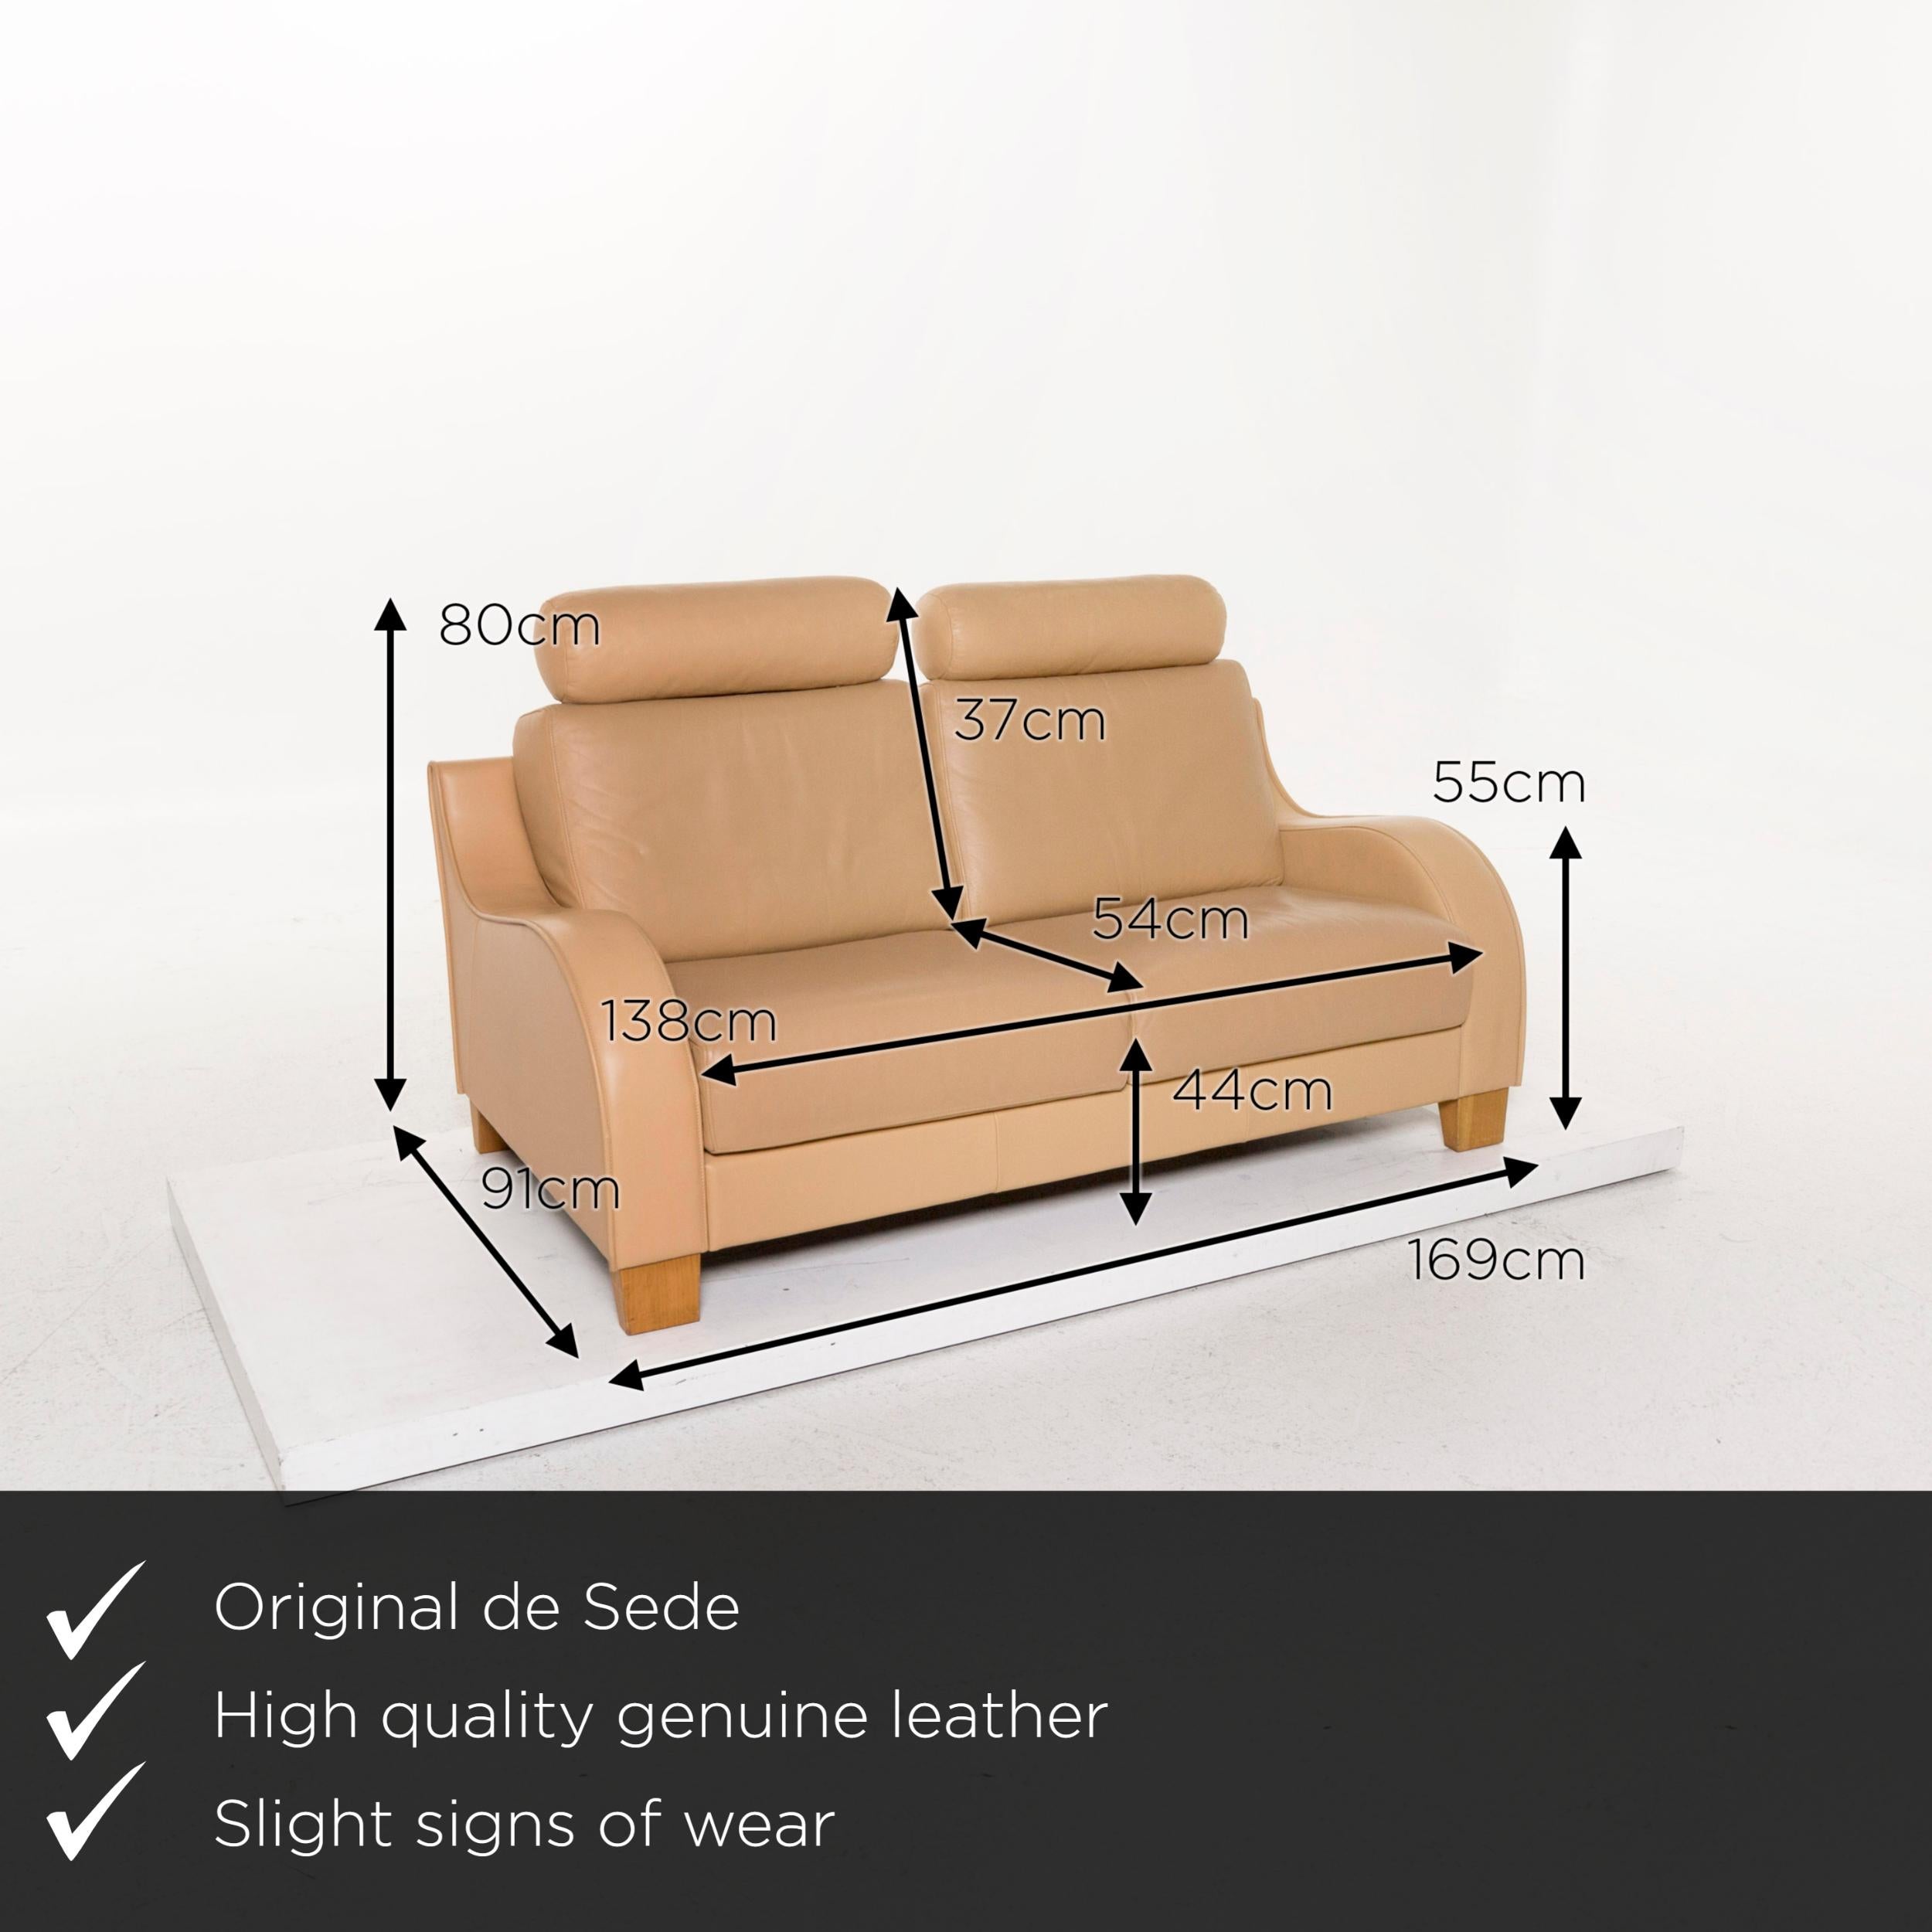 We present to you a de Sede leather sofa beige two-seat function couch.
    
 

 Product measurements in centimeters:
 

Depth 91
Width 169
Height 80
Seat height 44
Rest height 55
Seat depth 54
Seat width 138
Back height 37.